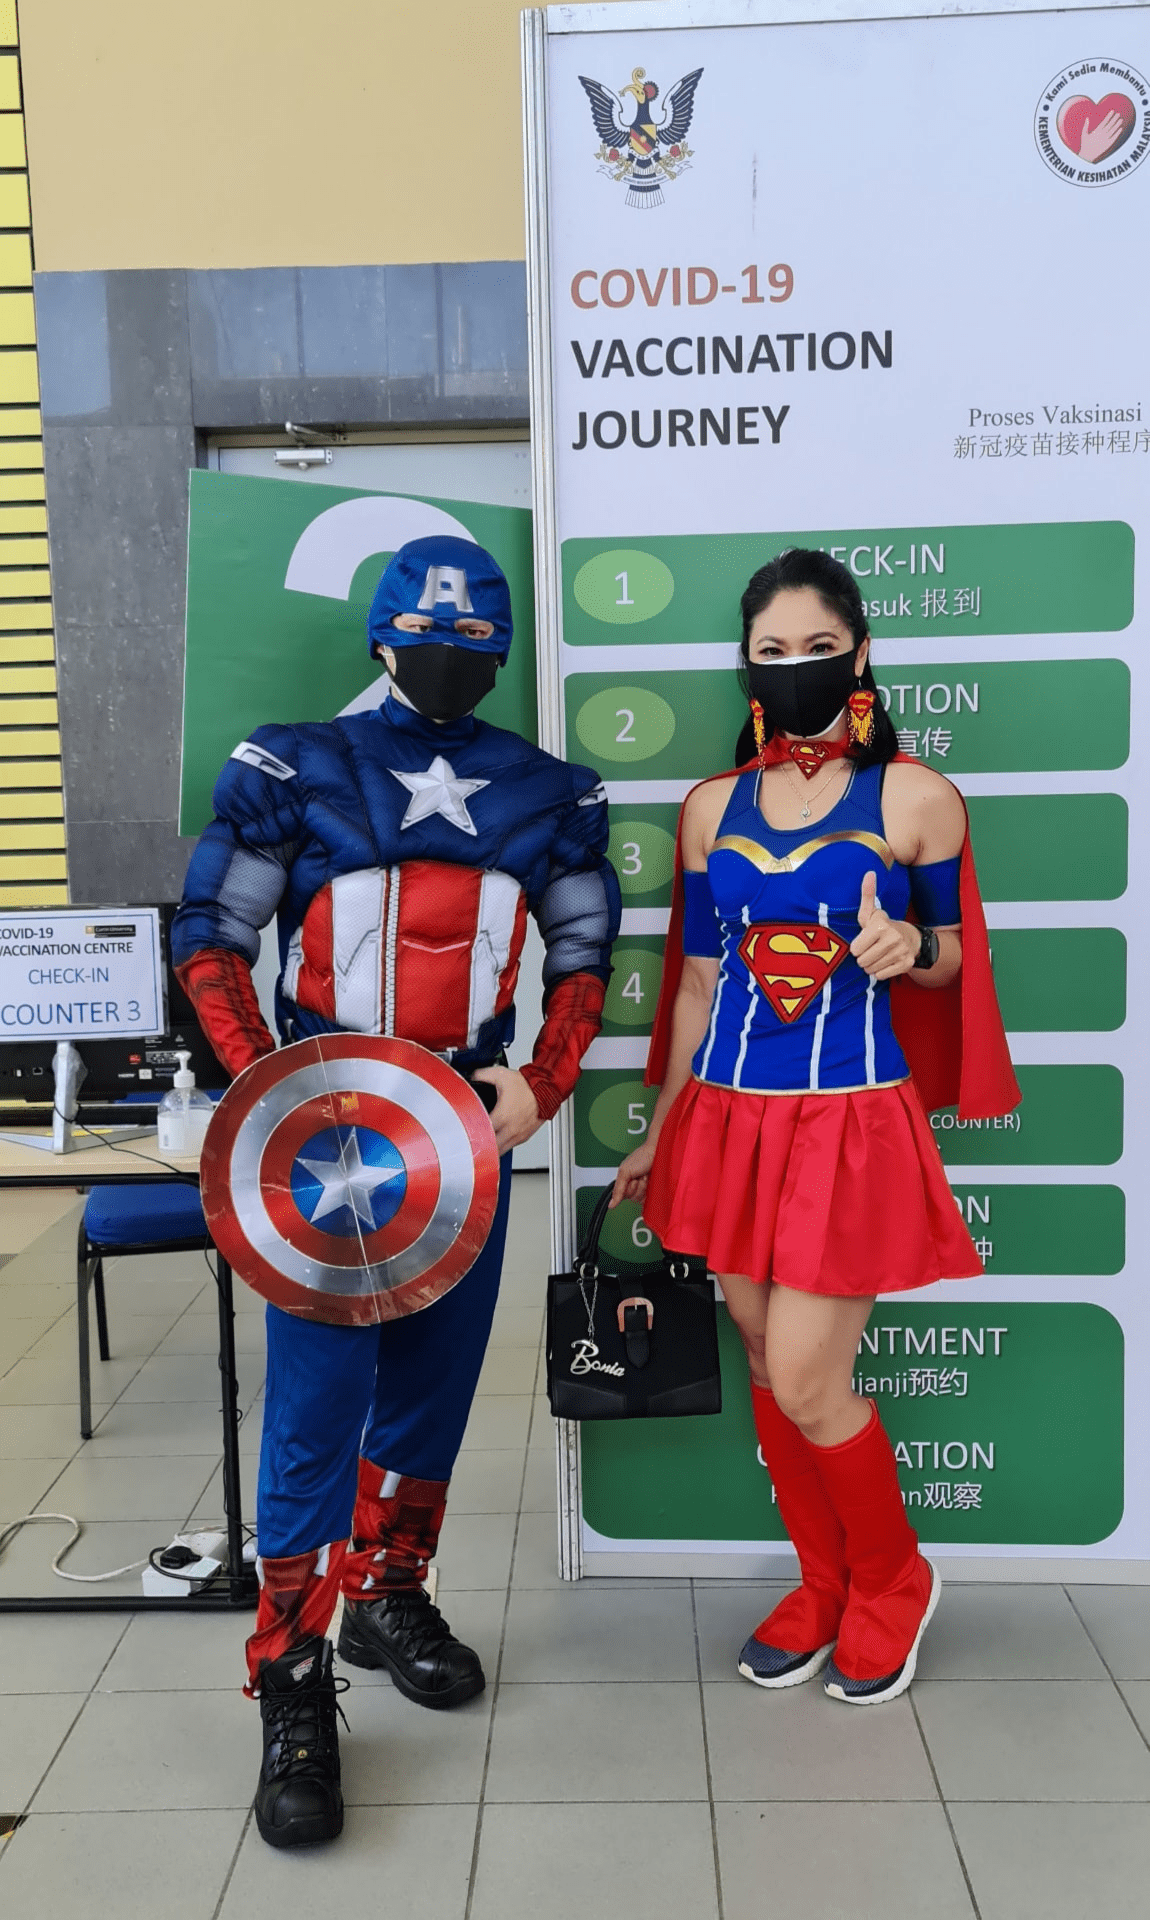 Malaysians wear costumes to vaccination - Captain America